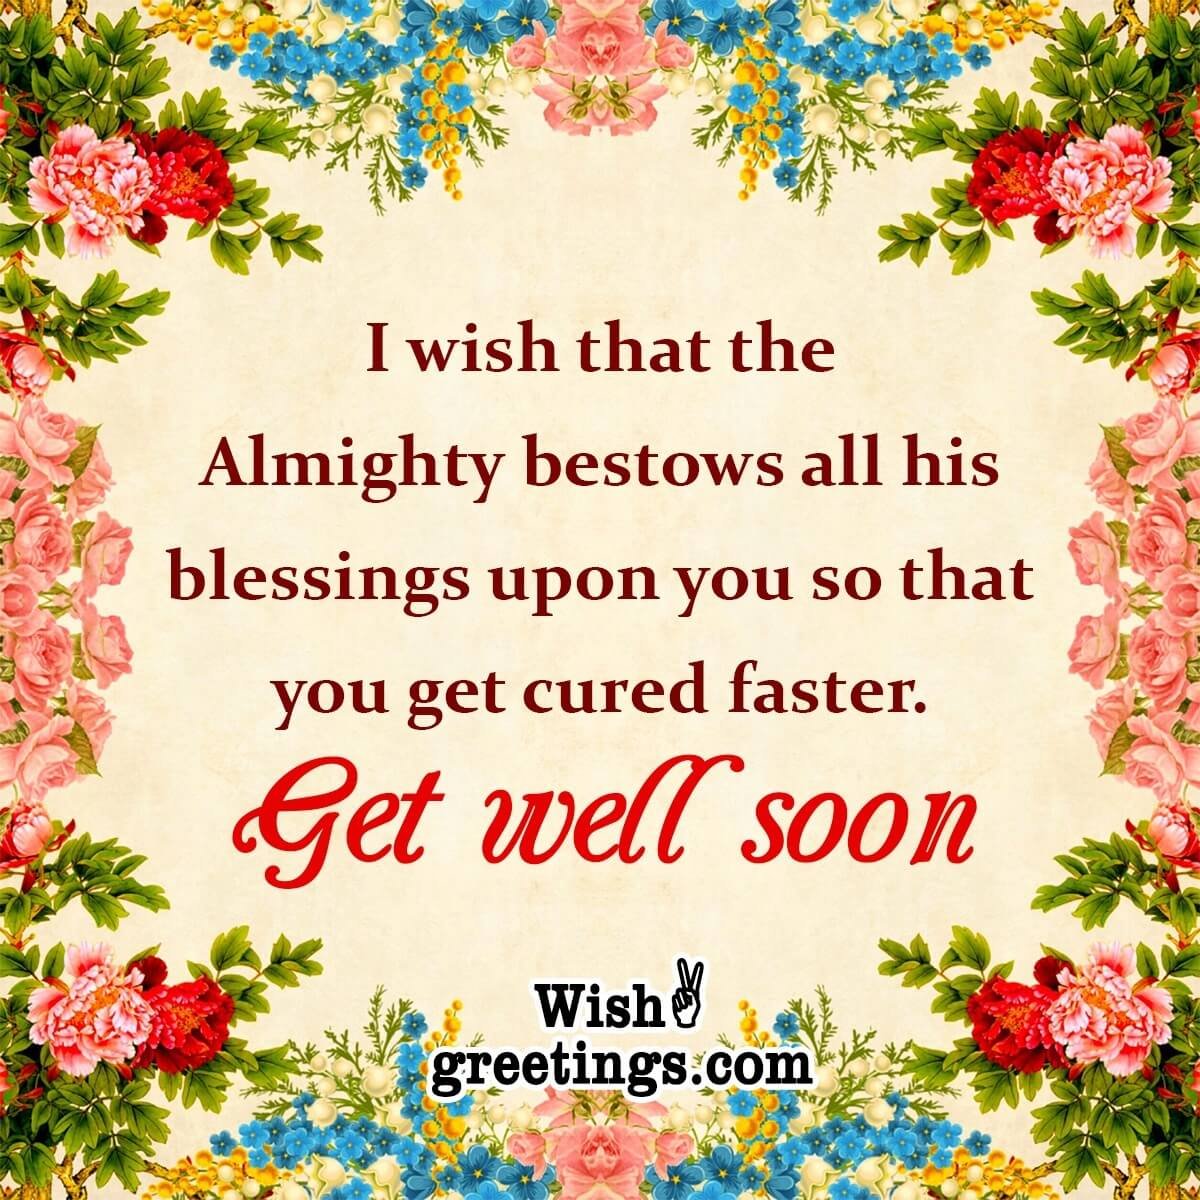 Religious Get Well Soon Image